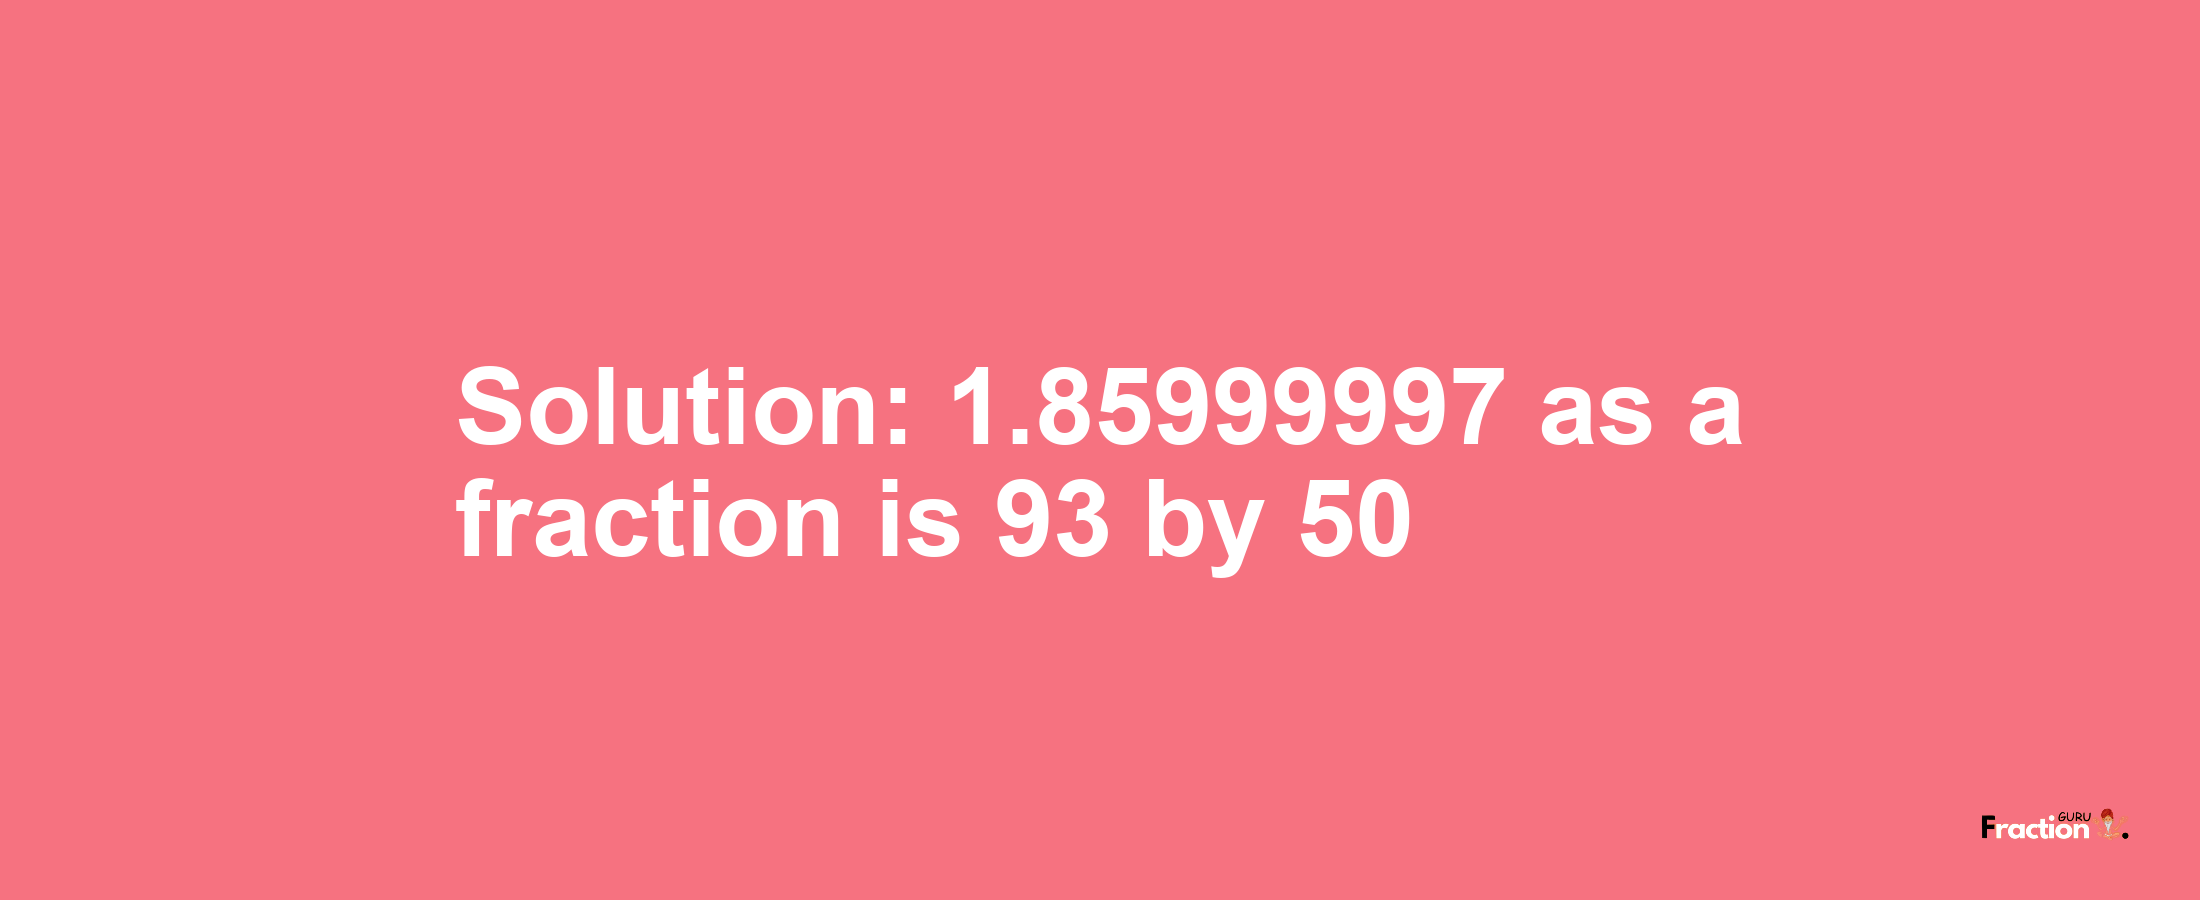 Solution:1.85999997 as a fraction is 93/50